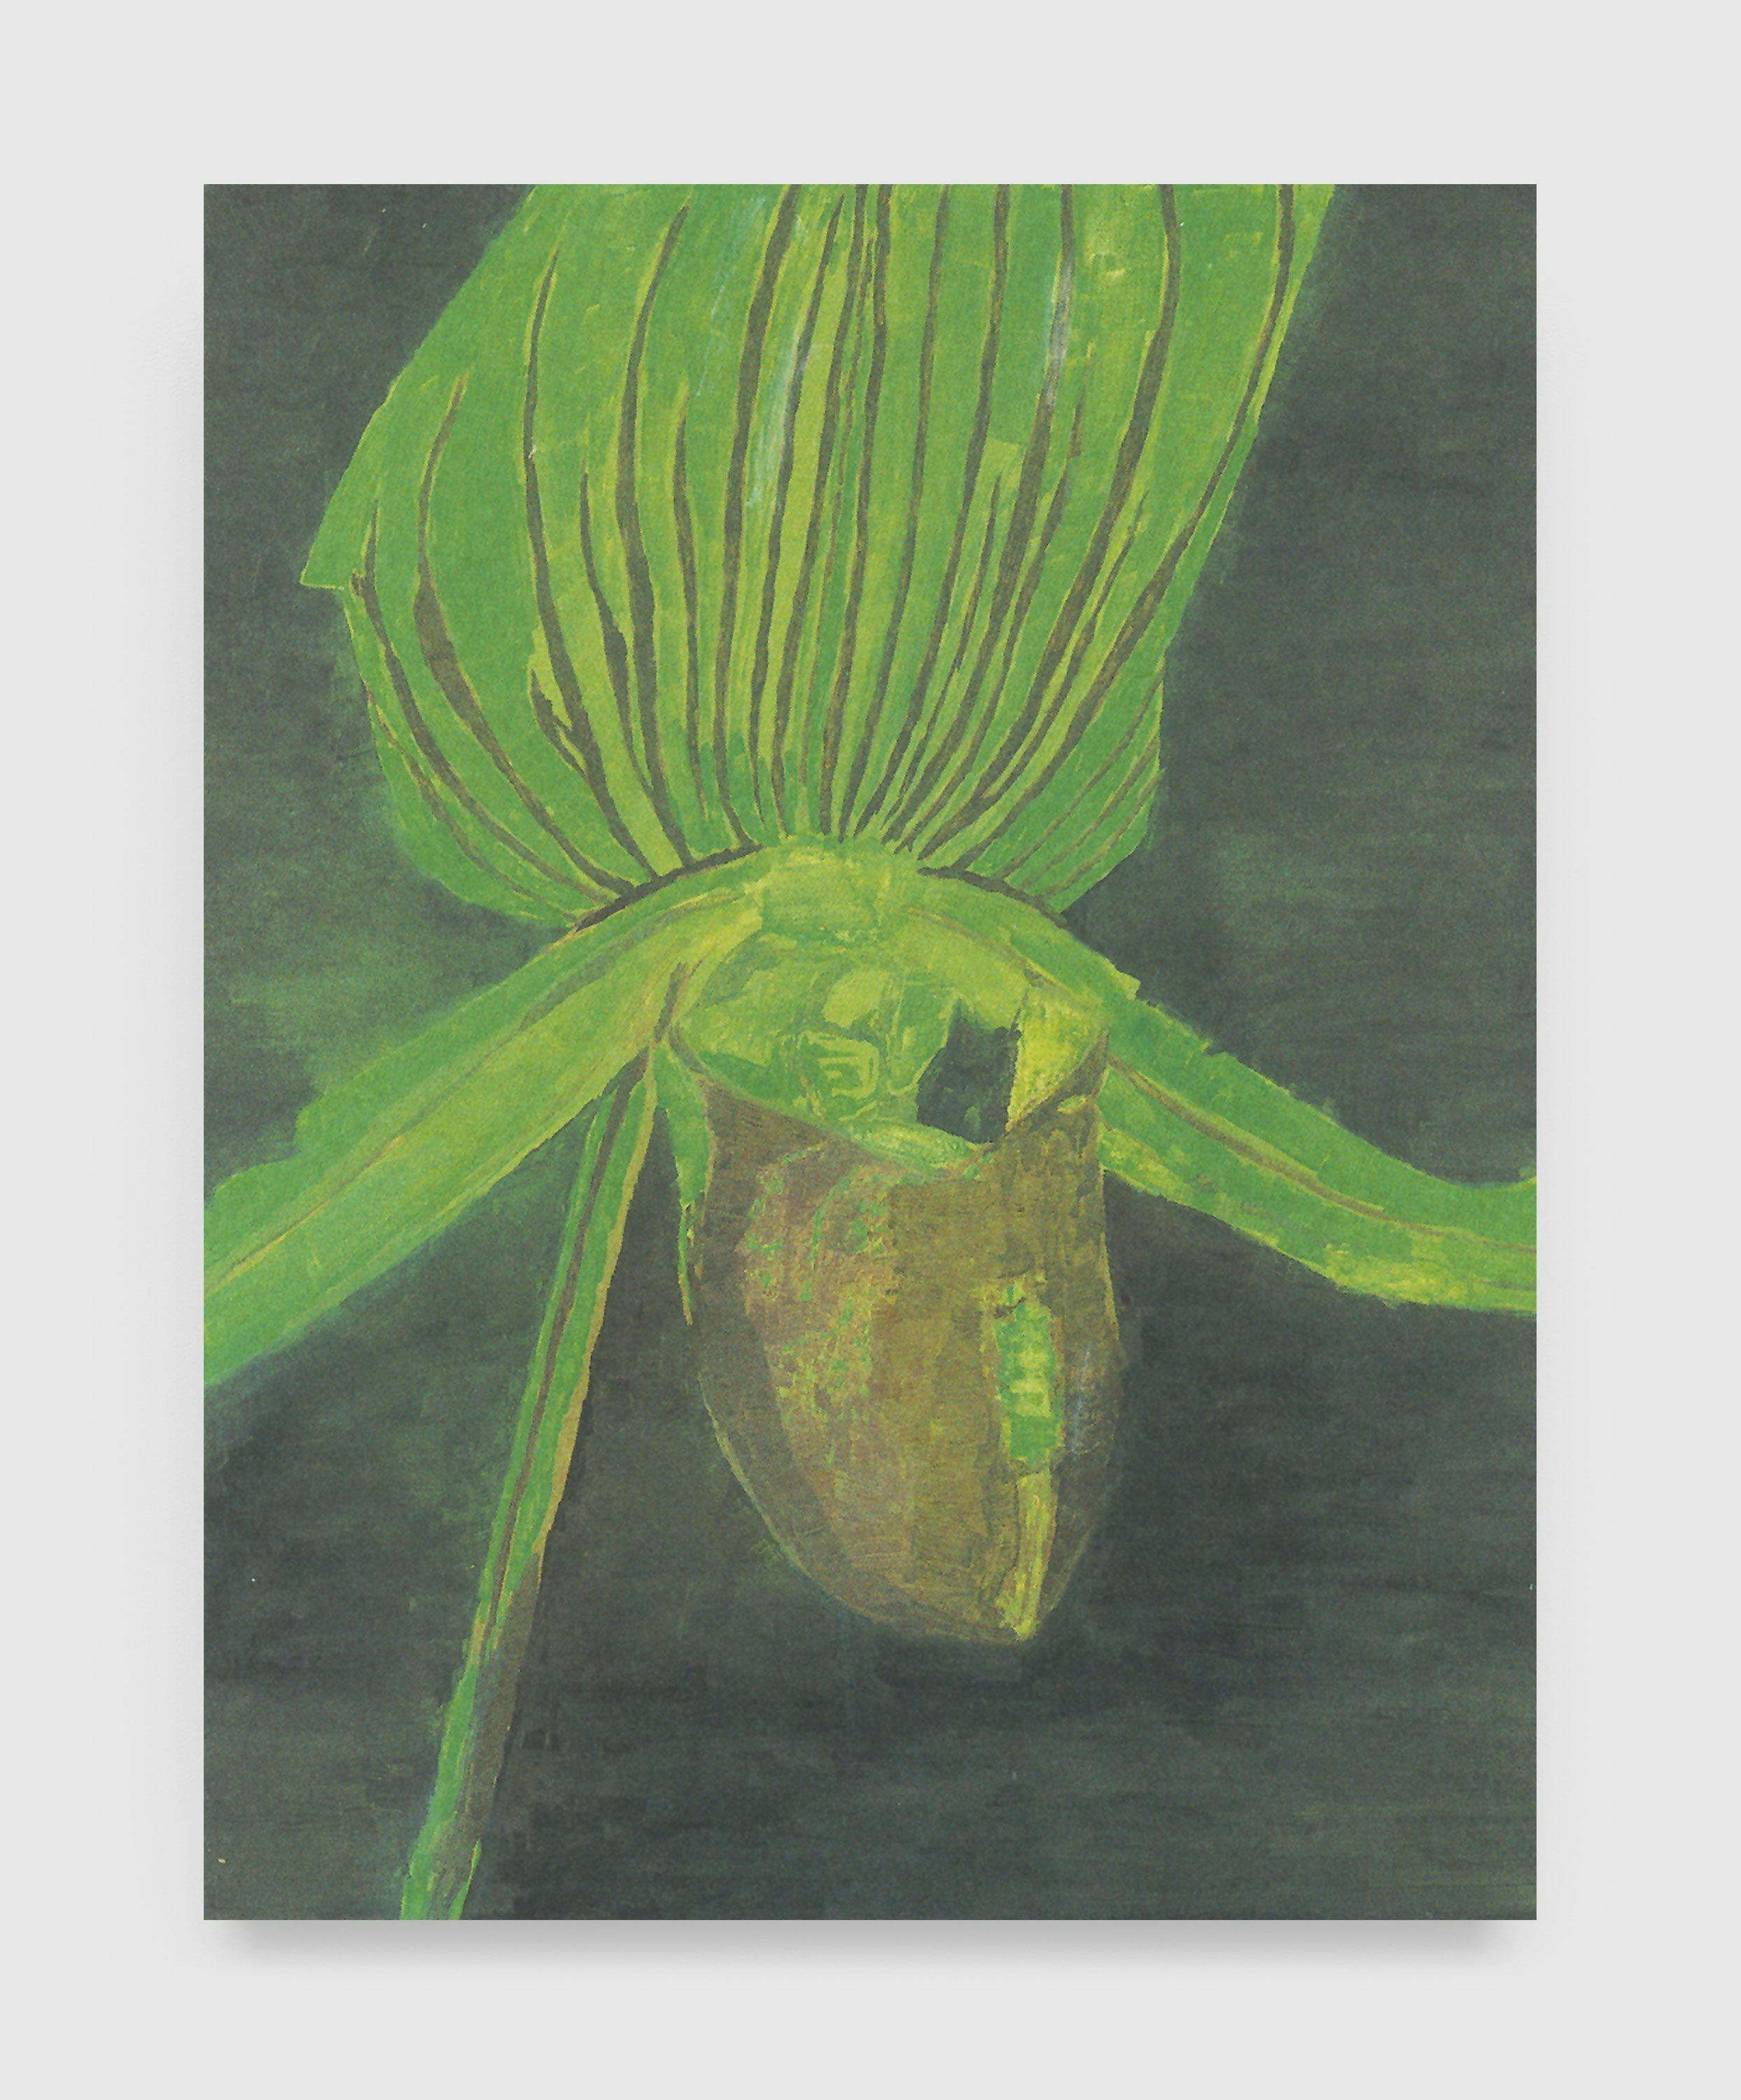 A painting by Luc Tuymans, titled Orchid, dated 1998.